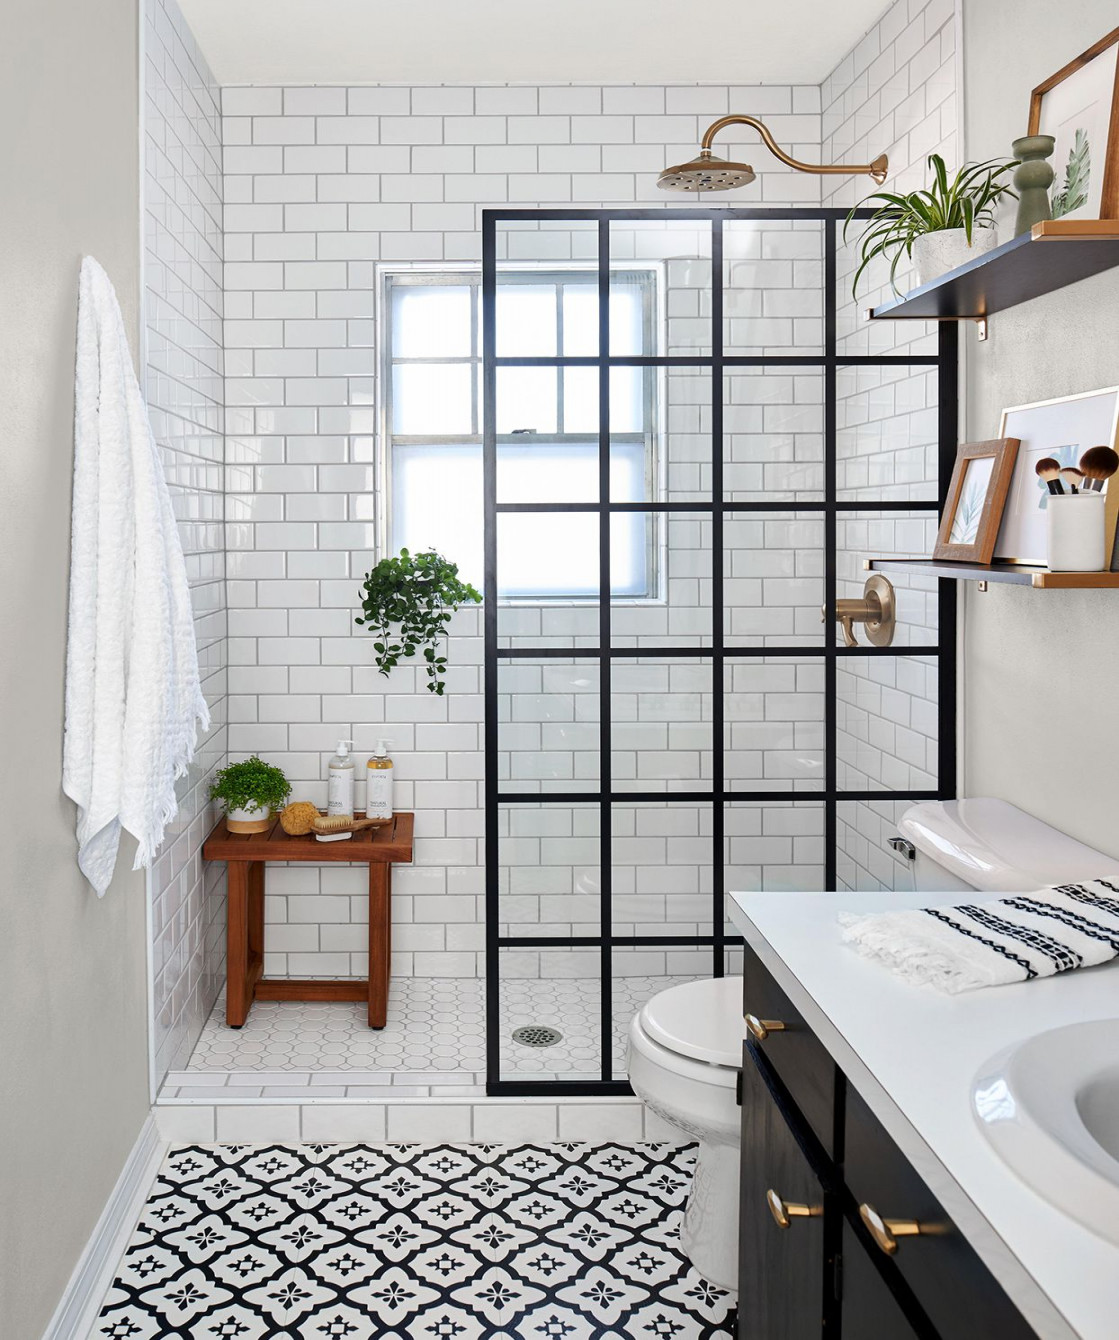 Small Bathroom Remodels Done With Budget-Friendly Ideas